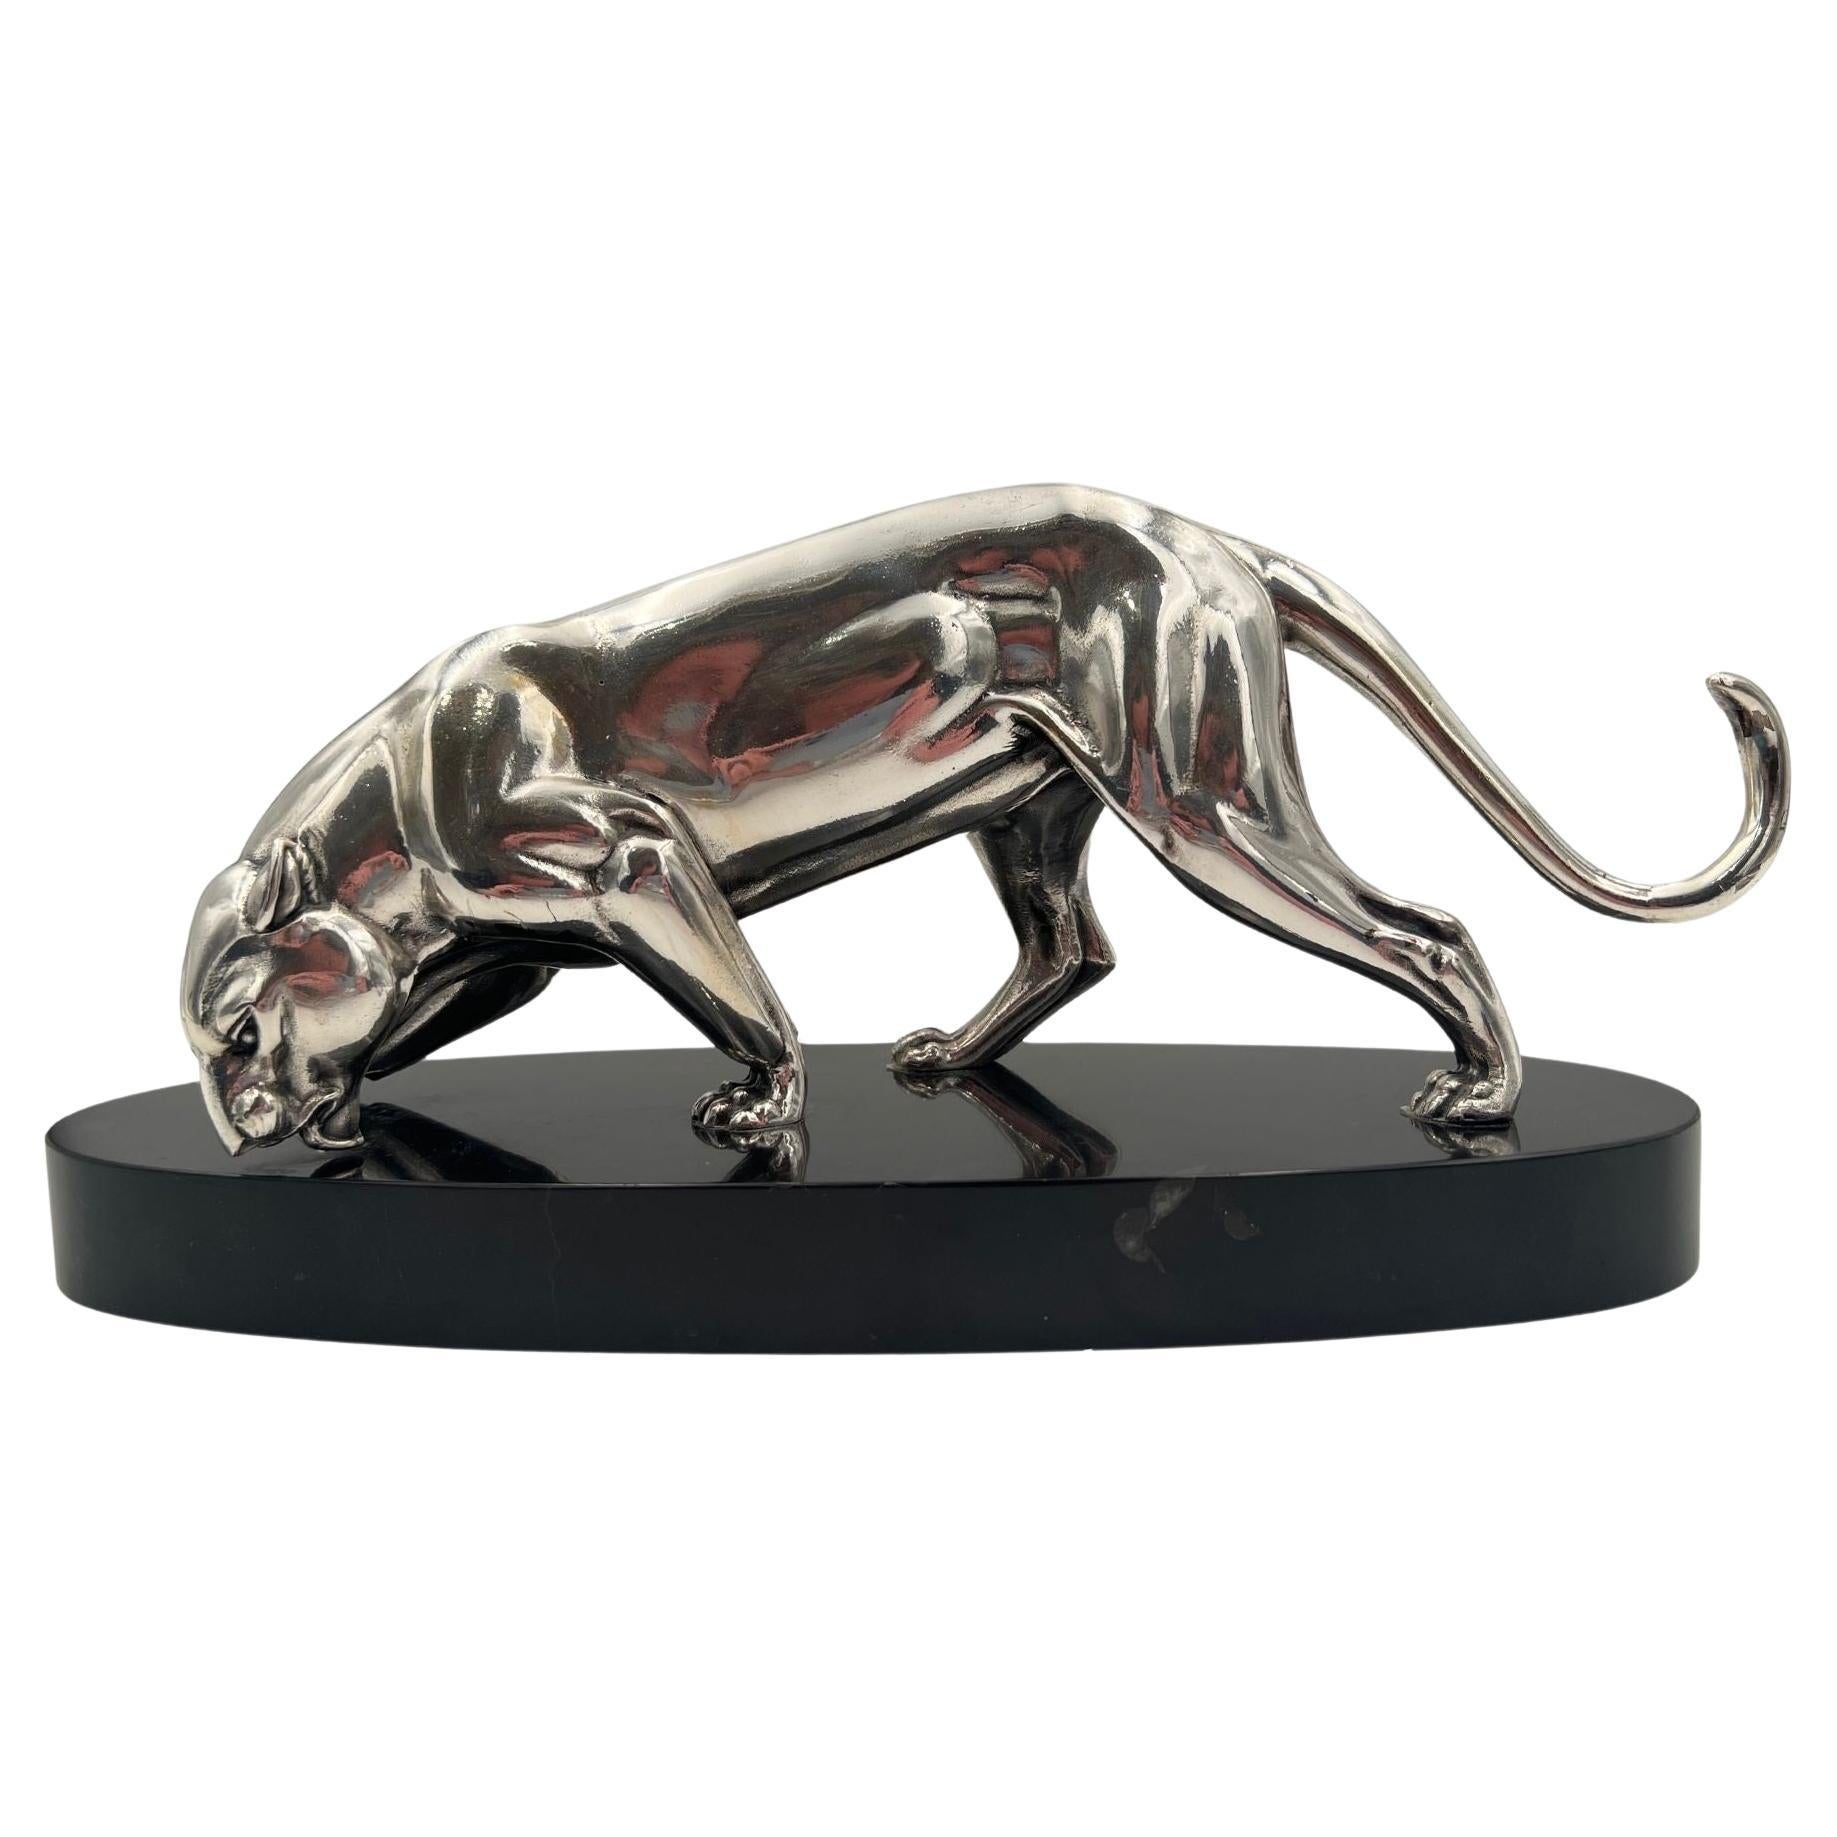 Art Deco Panther Sculpture, Silver Plated, France circa 1930 For Sale